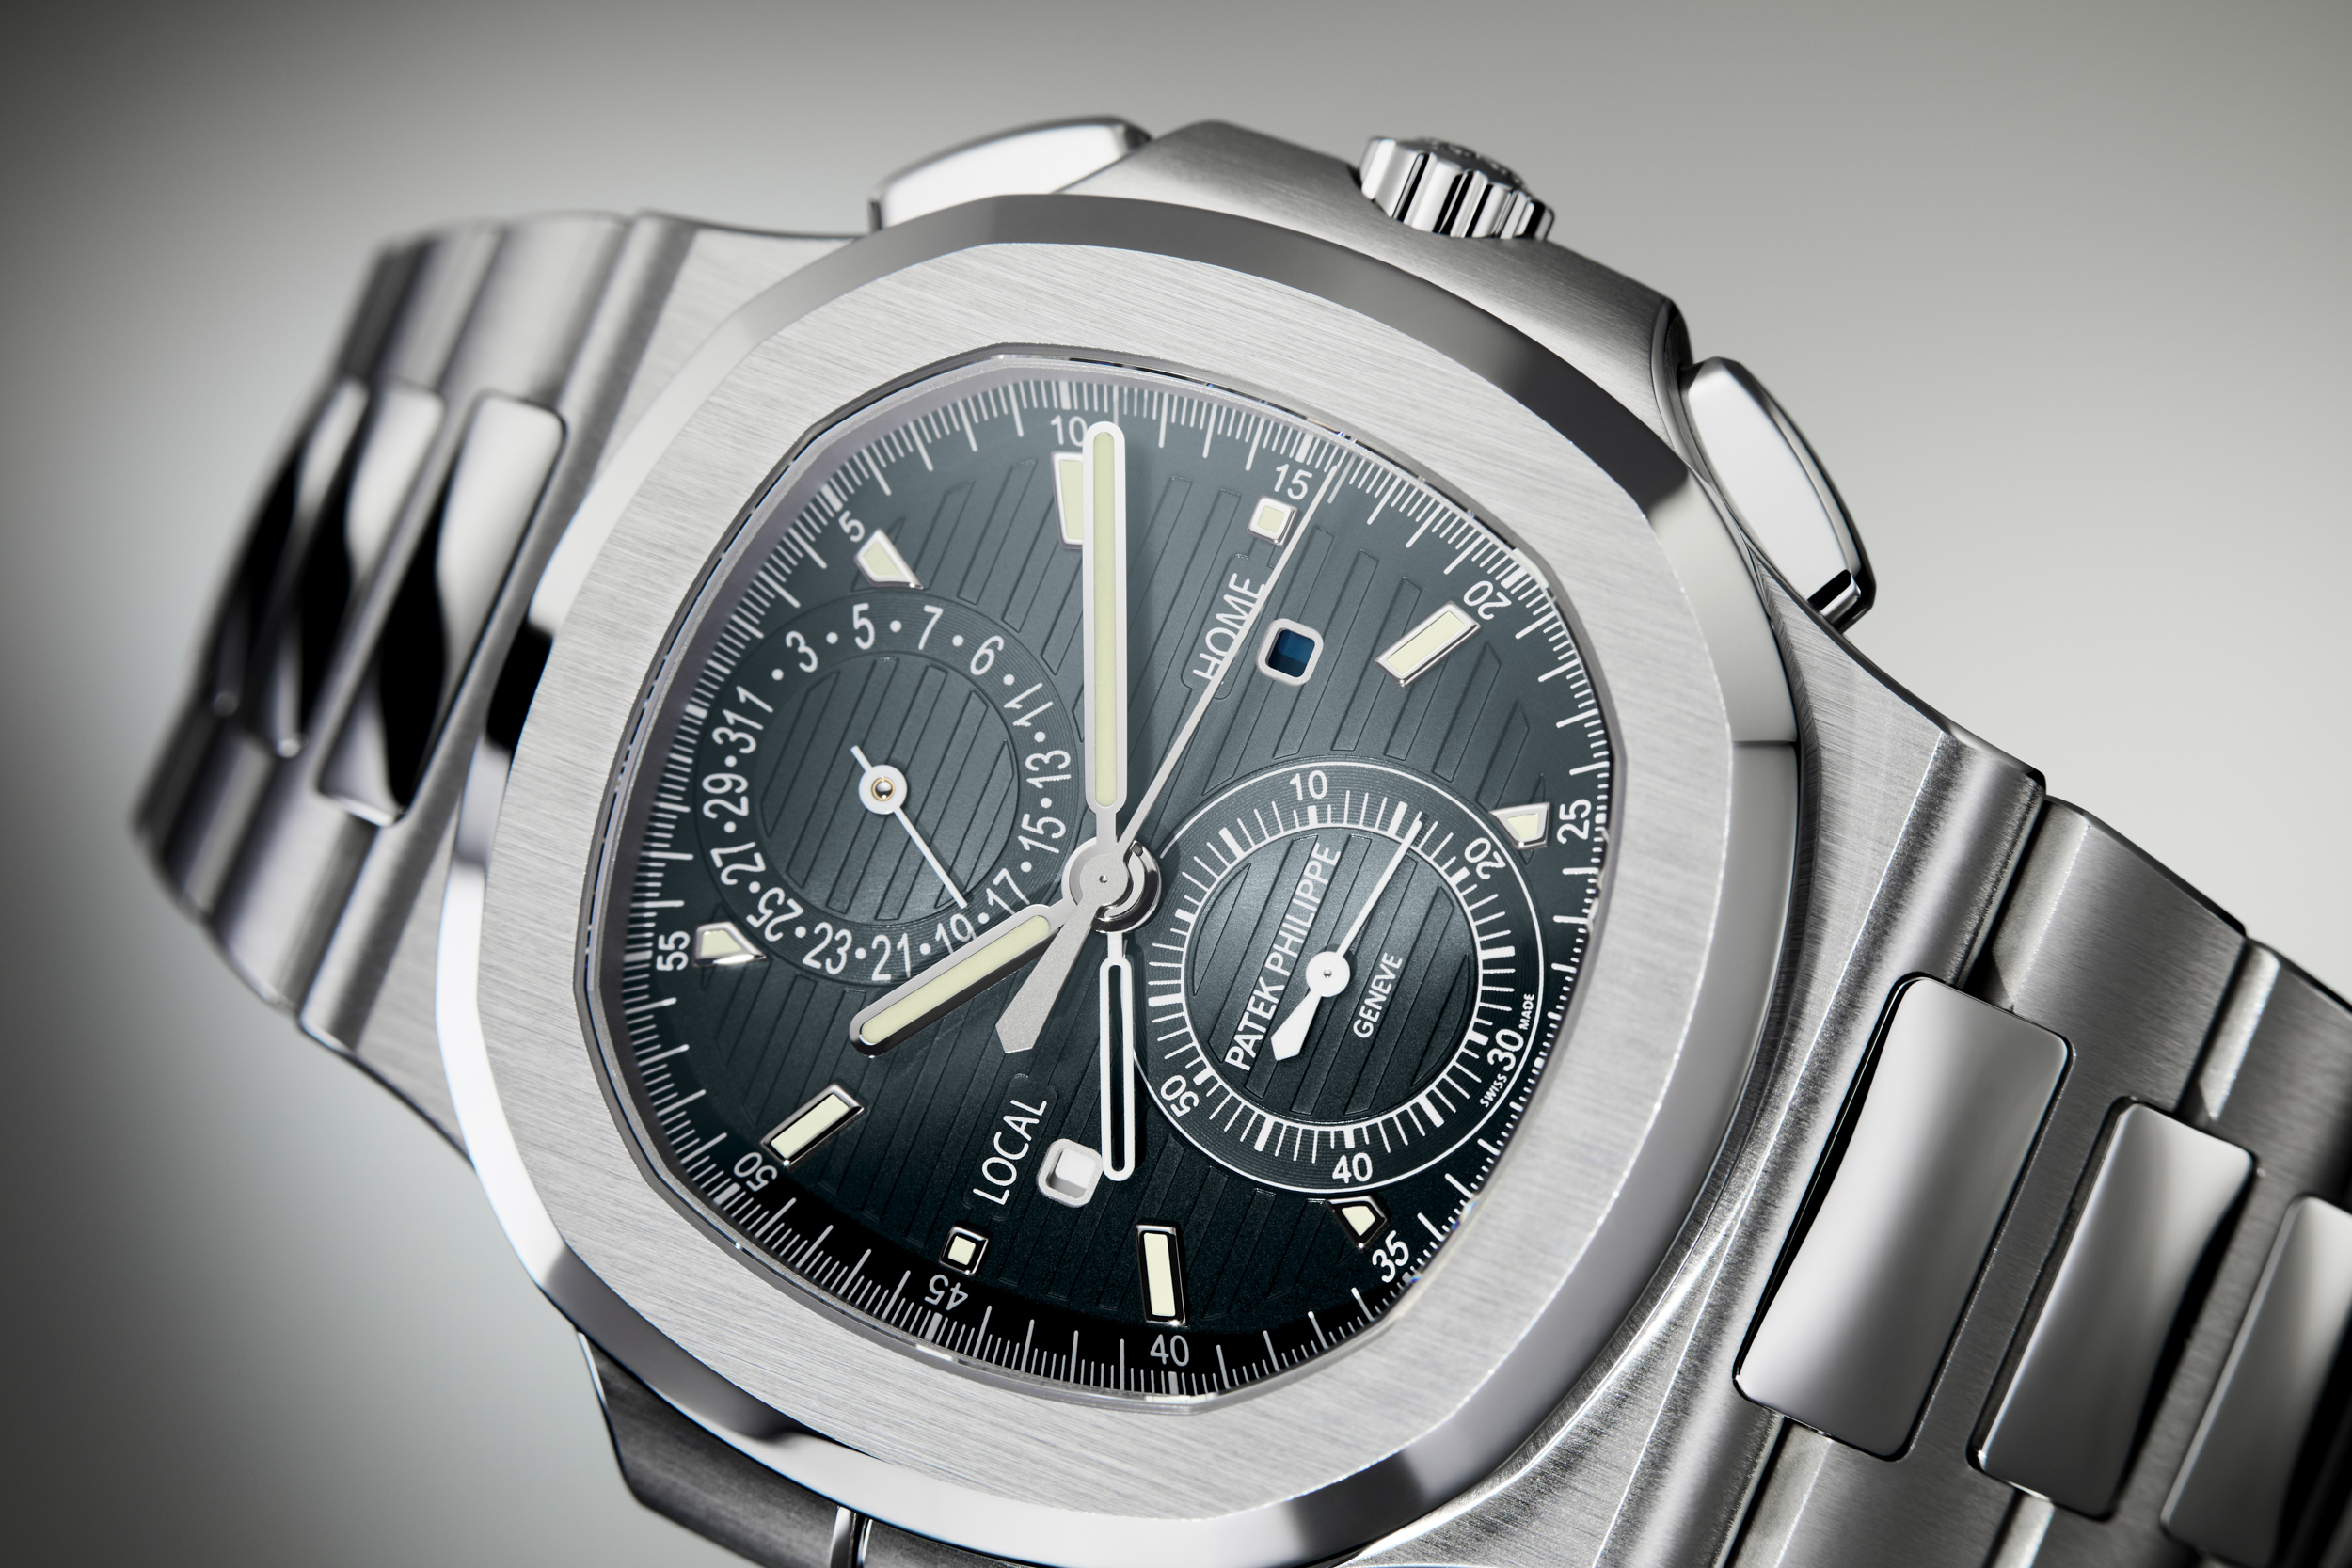 Patek Philippe Drops New Variant of the Nautilus Travel Time Chronograph